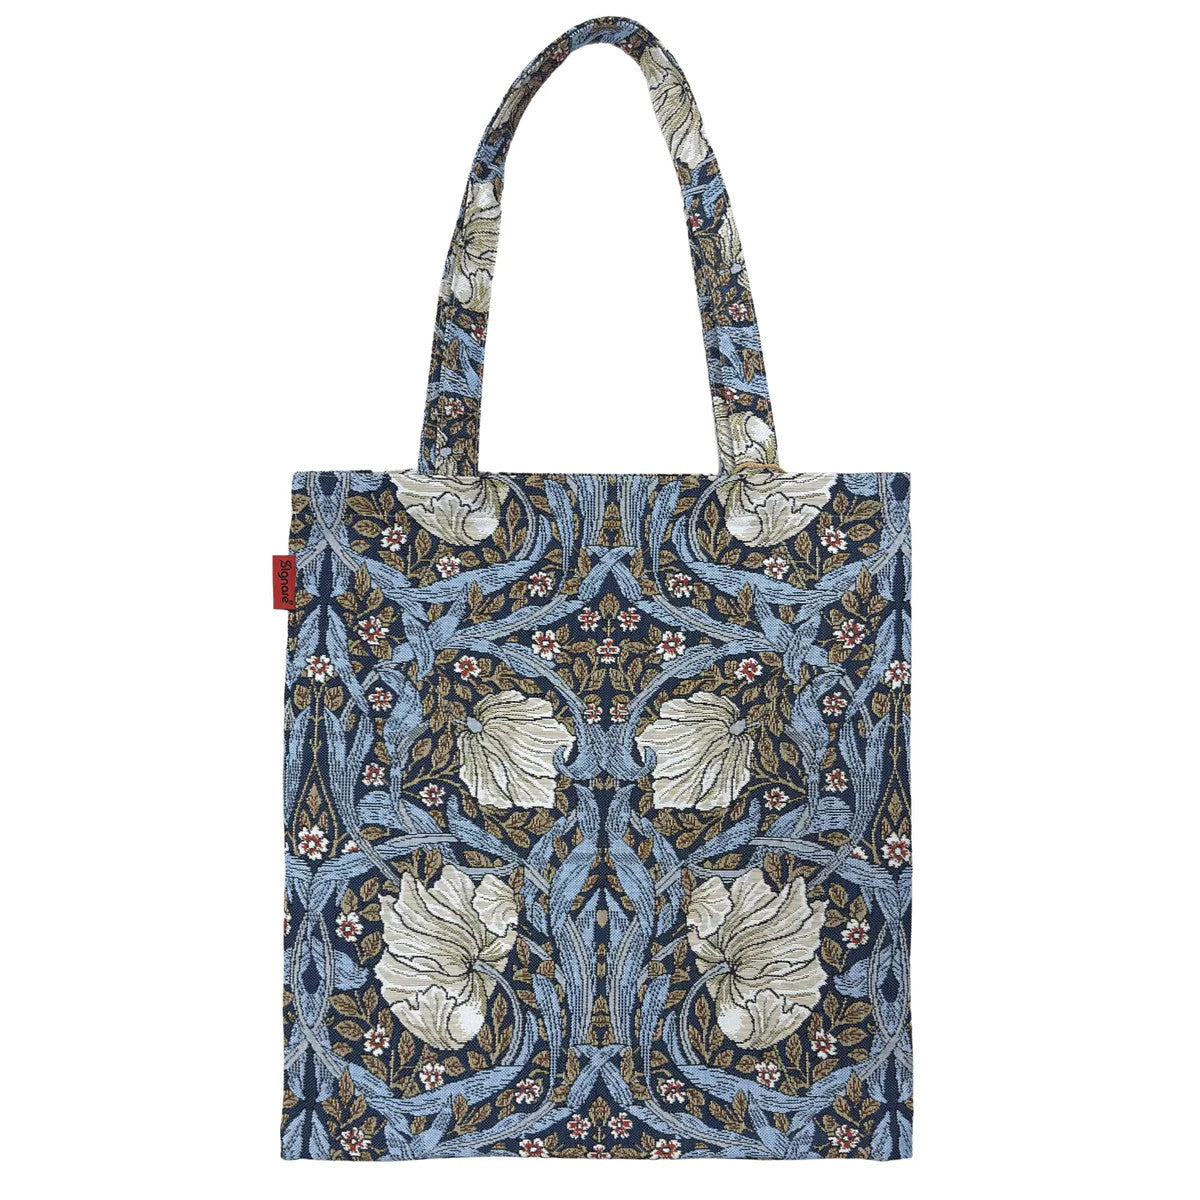 William Morris Pimpernel and Thyme Blue Flat Tote Bag.